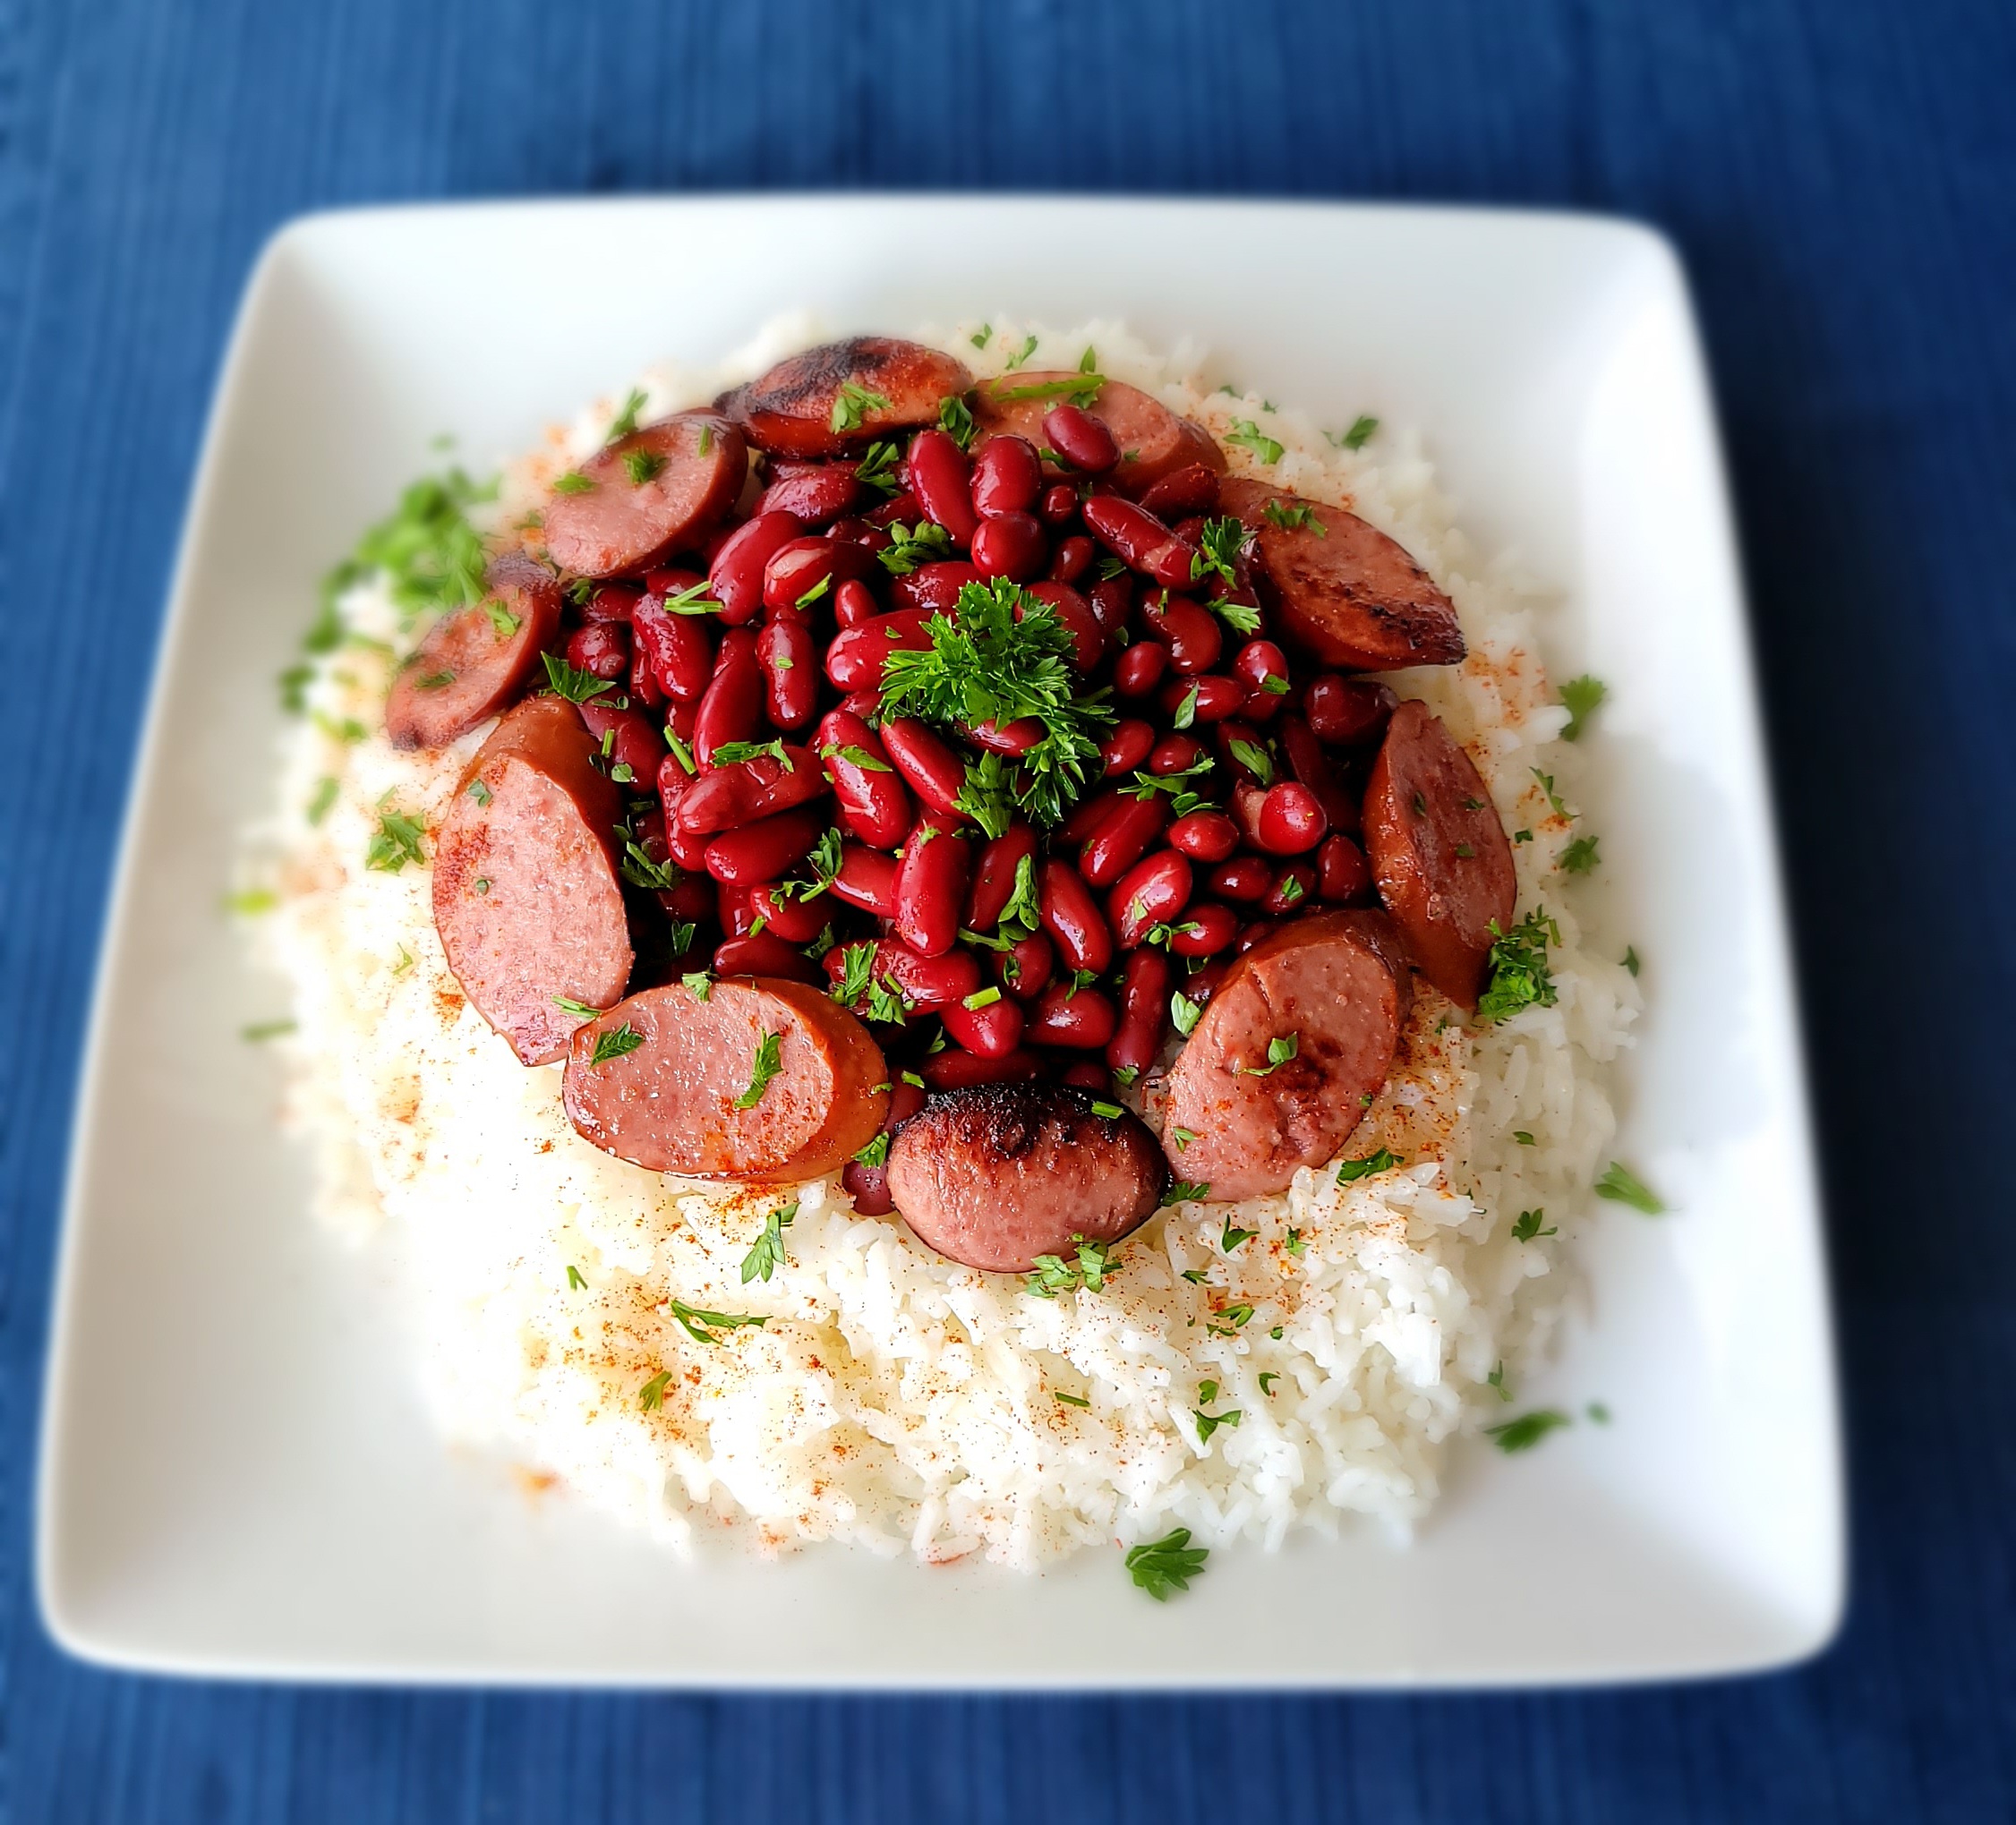 PHOTO: A plate of red beans and rice with sausage.